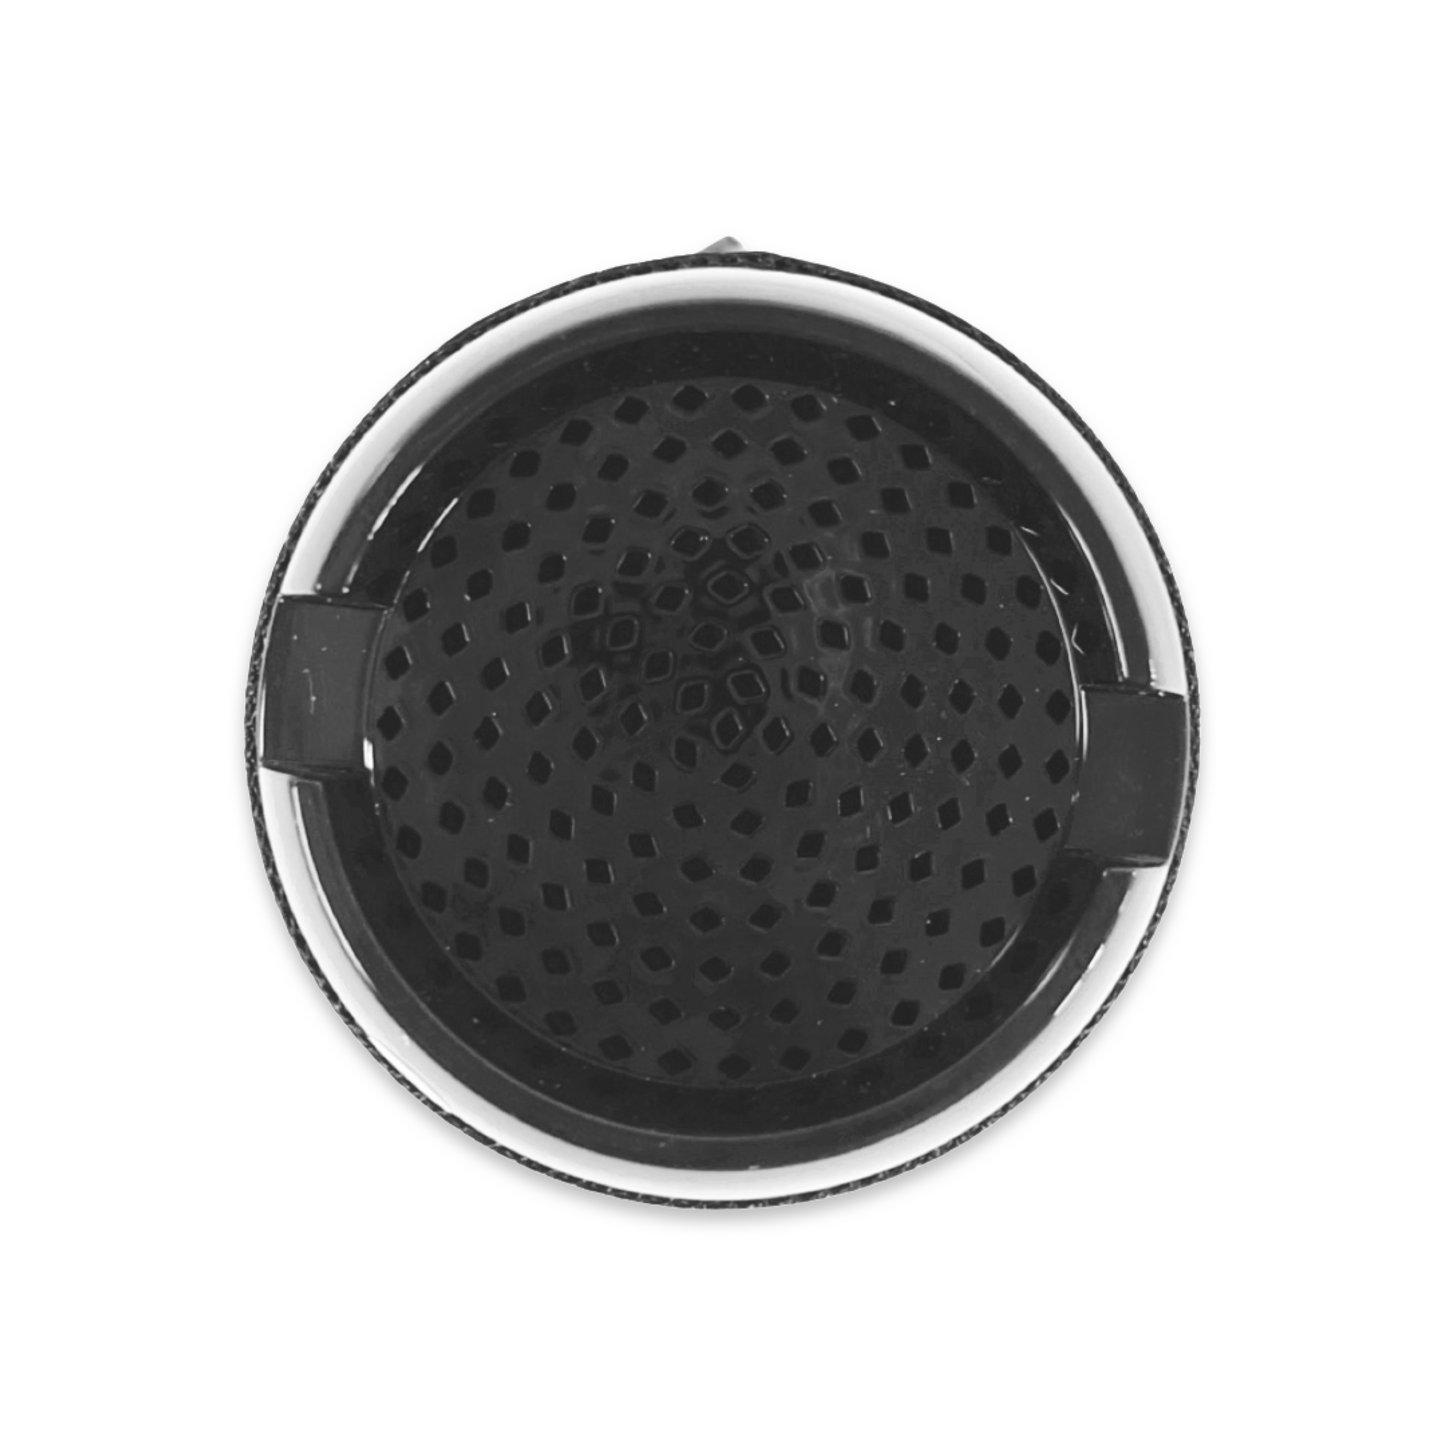 Black Portable Bluetooth Speaker with Handsfree Calling Mic, Waterproof, and FM Radio Capability